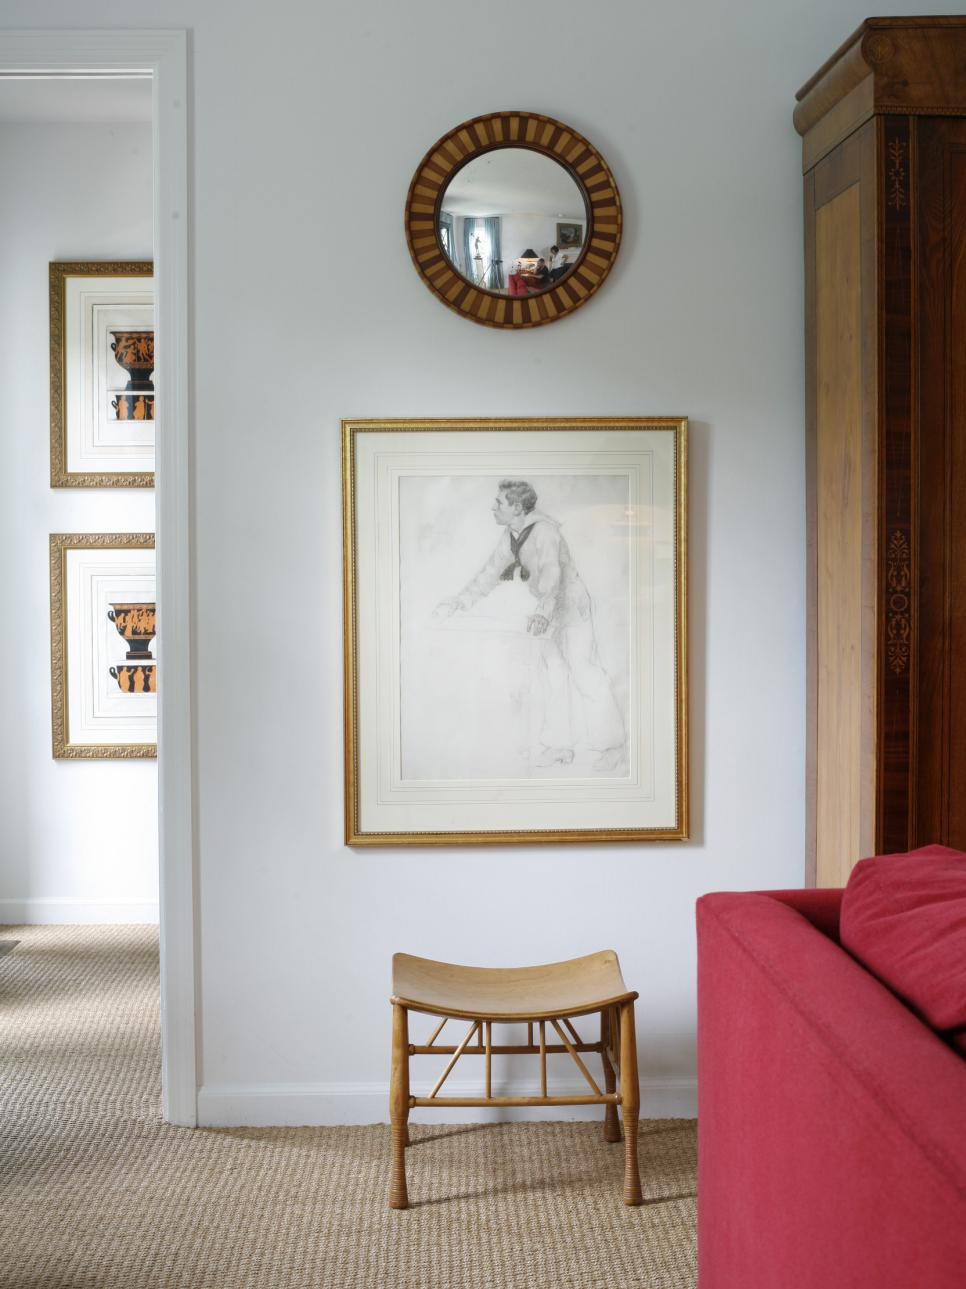 Framed Artwork and Round Decorative Mirror on White Wall